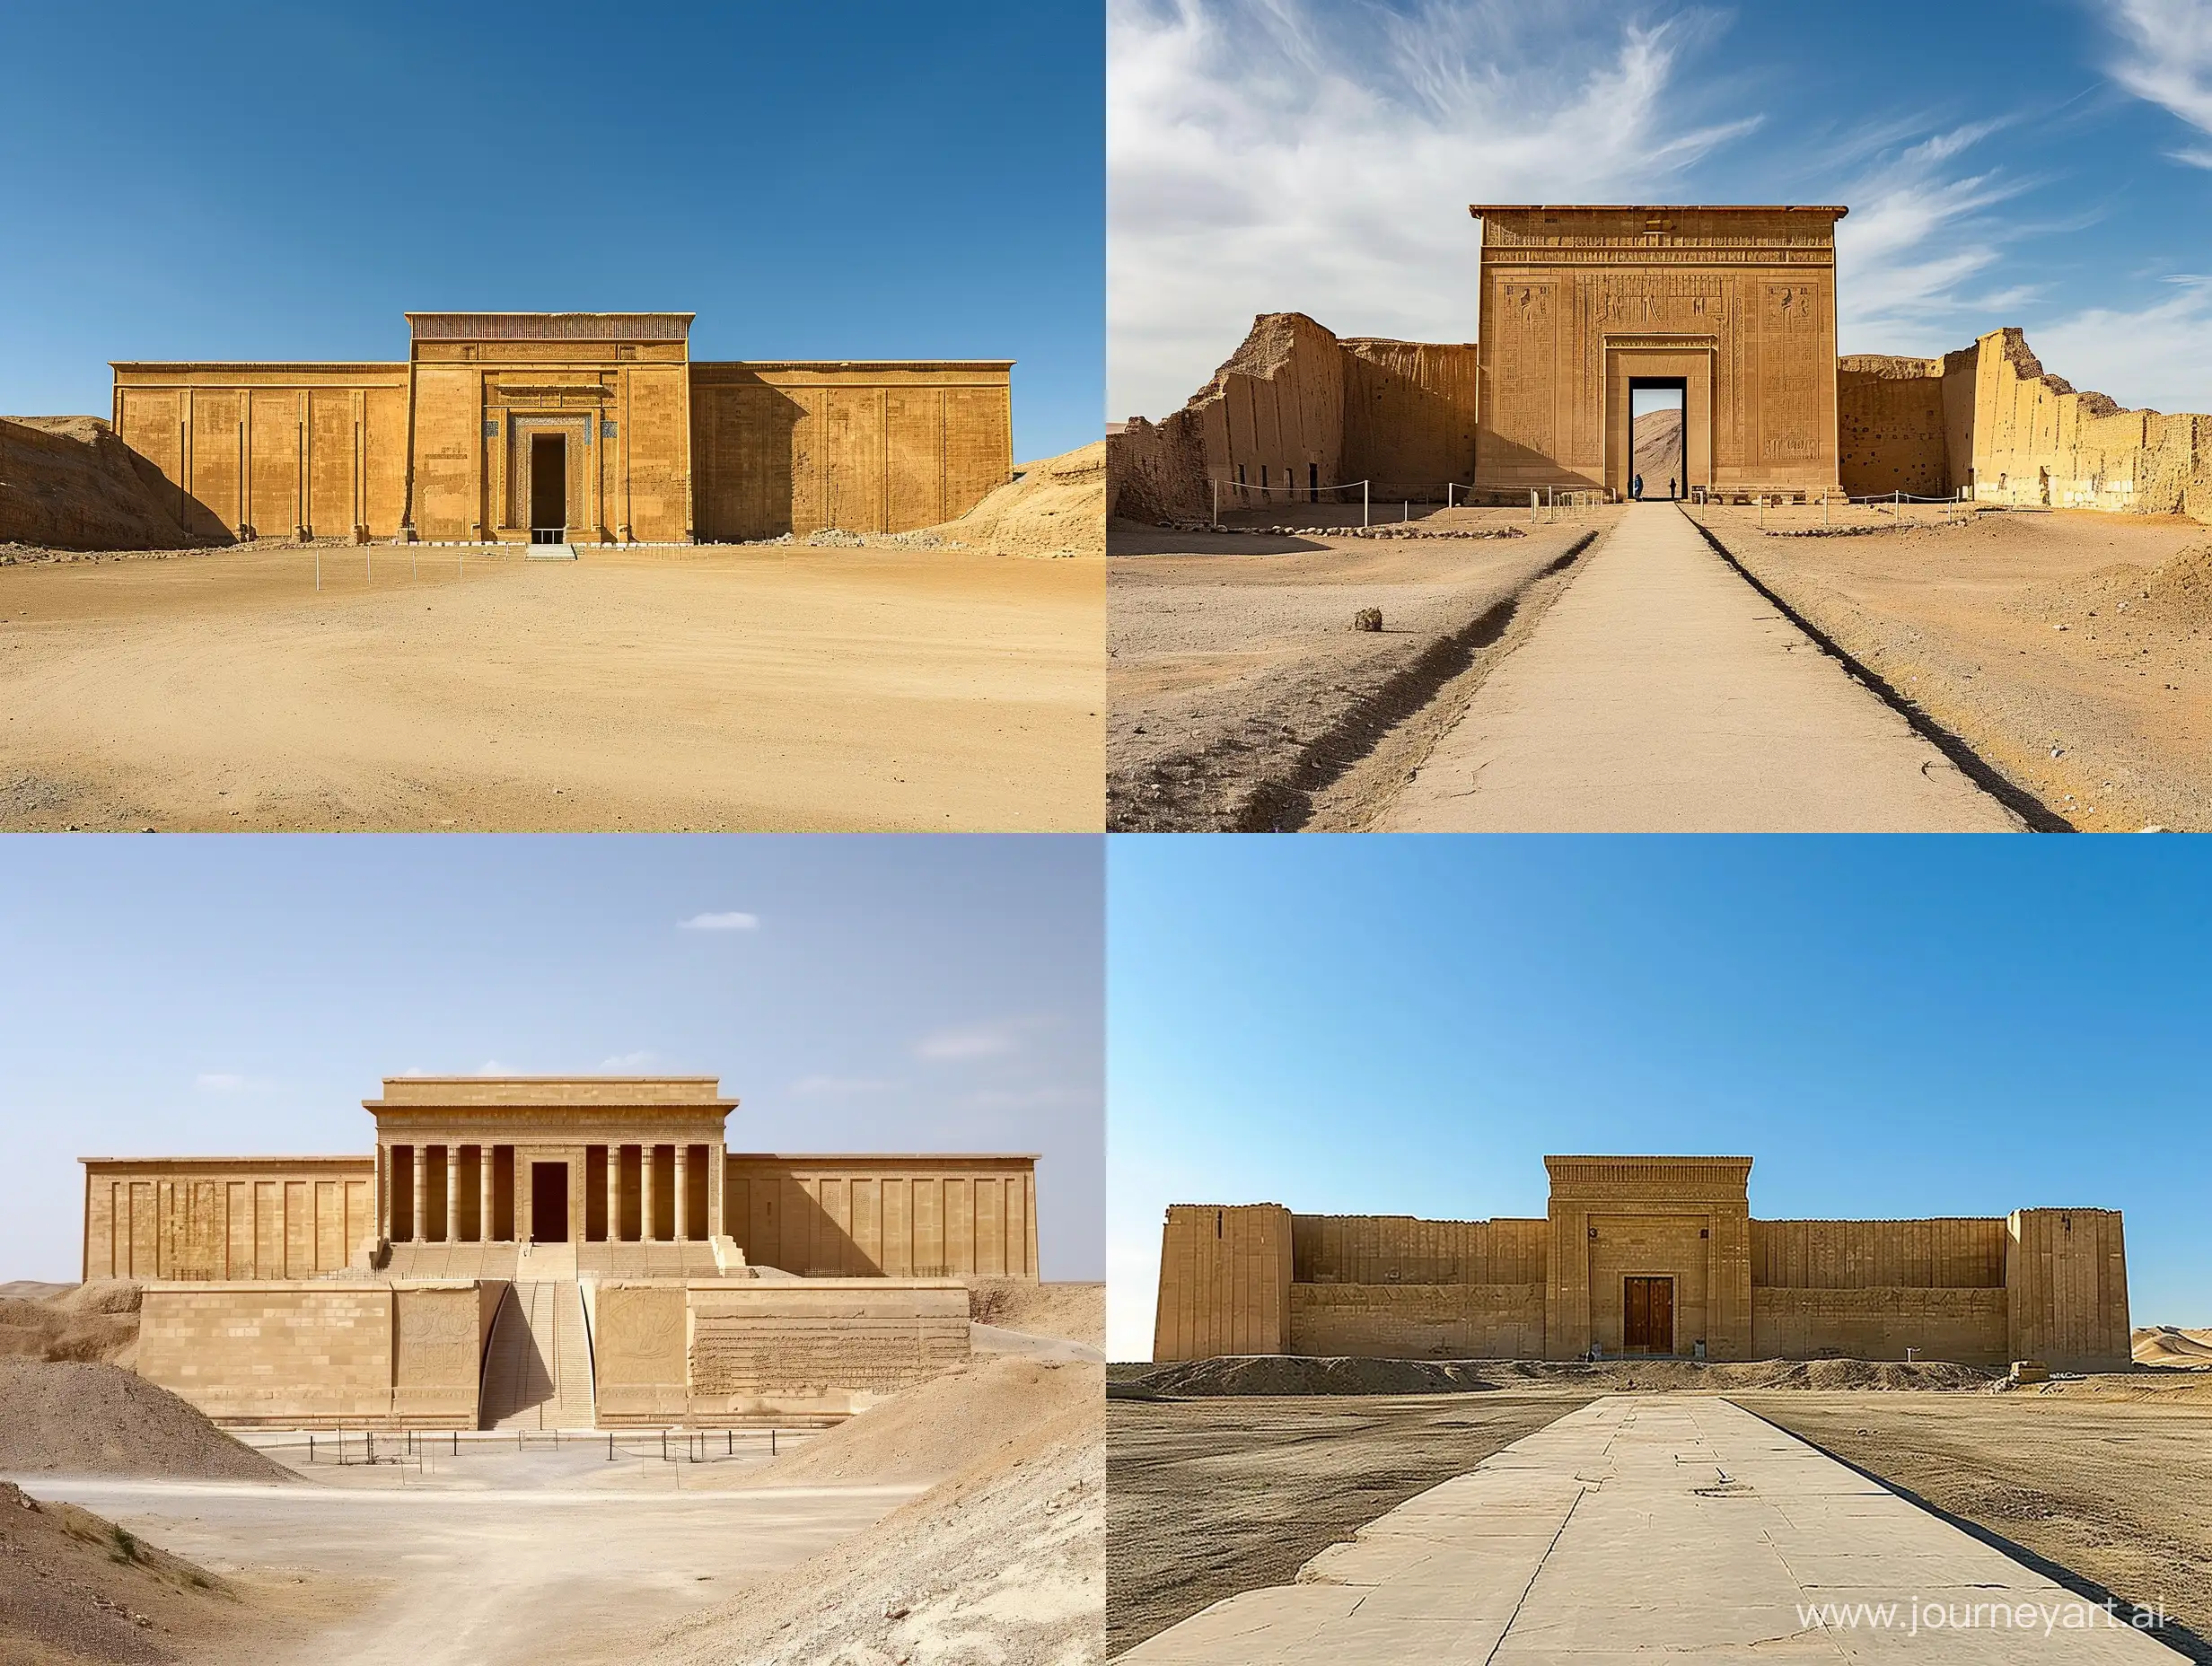 A great palace of the Achaemenid civilization in the desert From the front view